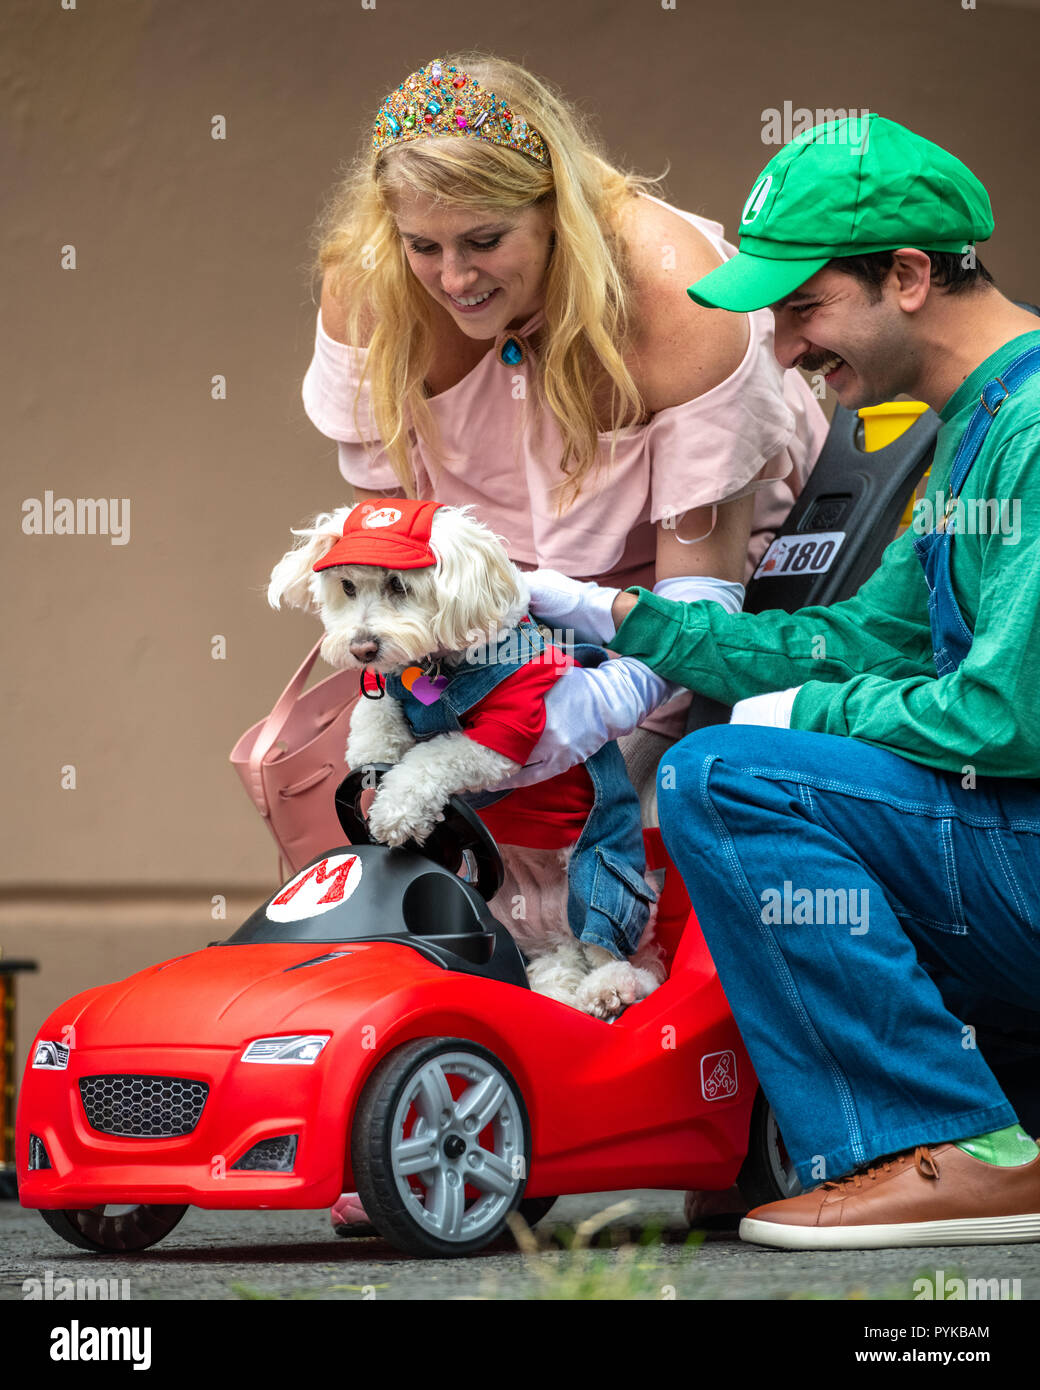 New York, USA,28 October 2018.  A couple help their dog dressed as Super Mario guide its toy car on stage during the 28th Annual Tompkins Square Halloween dog parade in New York city. Credit: Enrique Shore/Alamy Live News Stock Photo